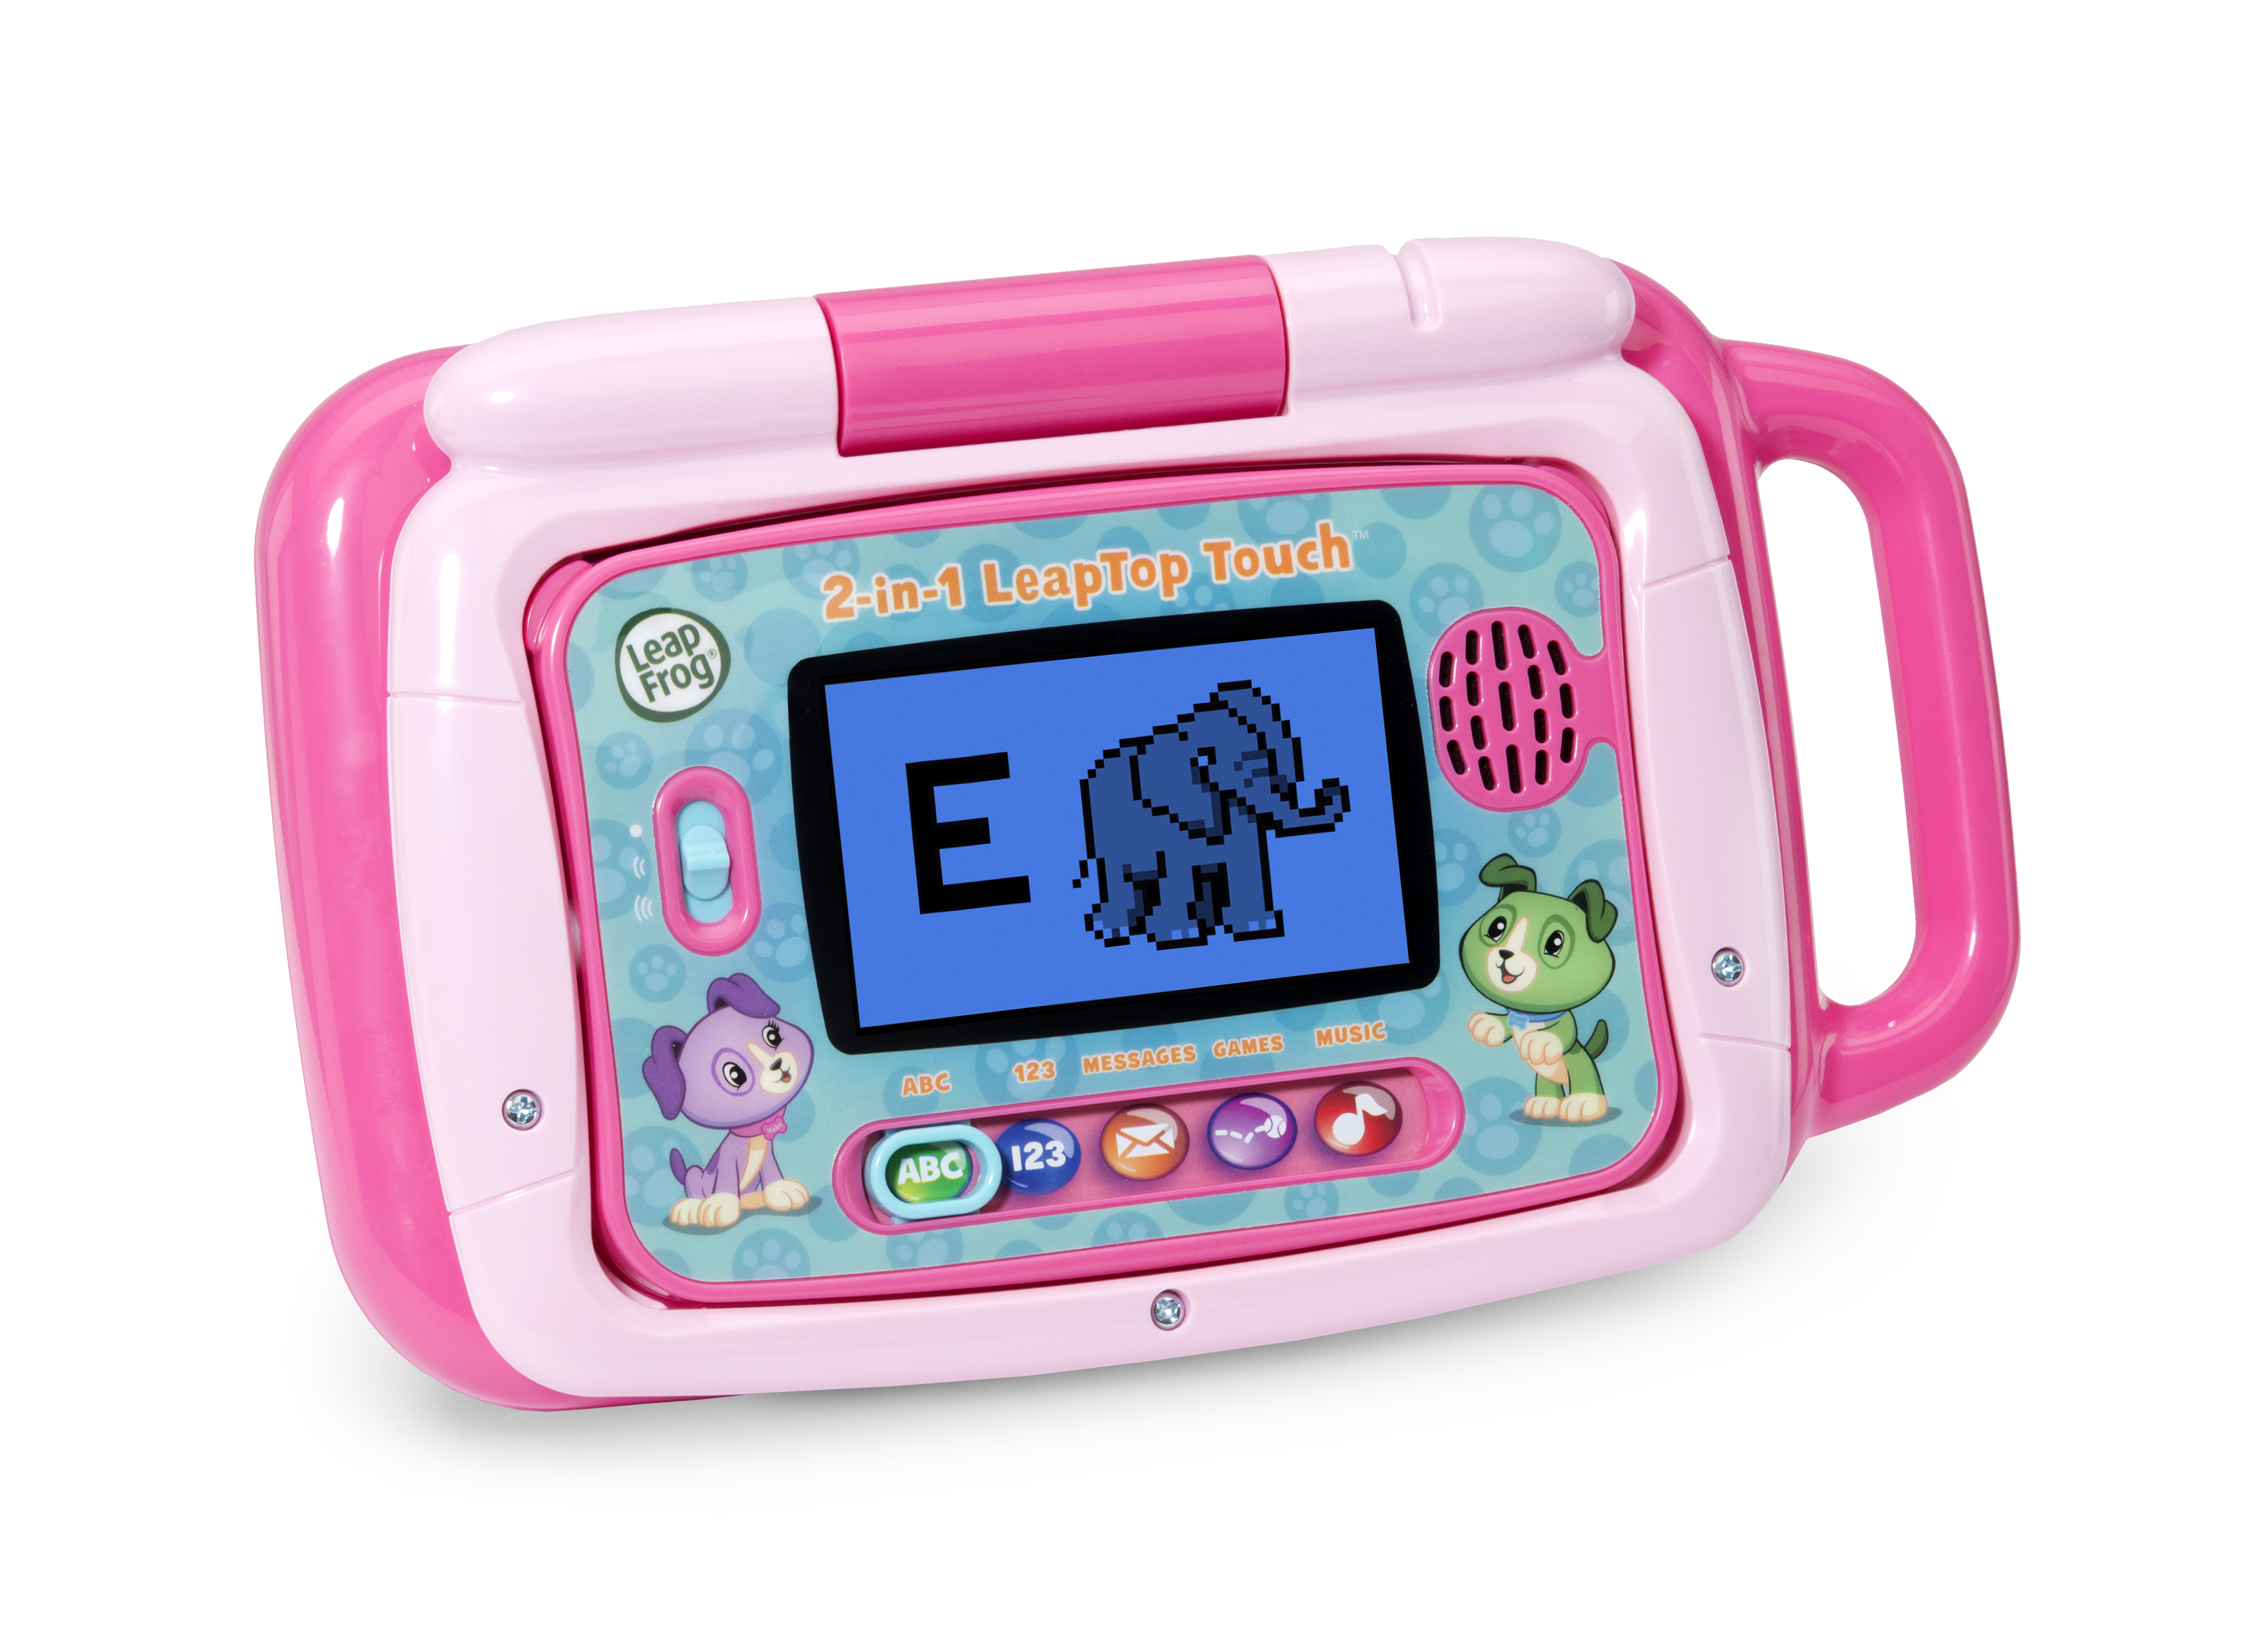 LeapFrog 2-in-1 LeapTop Touch for Toddlers, Electronic Learning System, Teaches Letters, Numbers - image 11 of 12